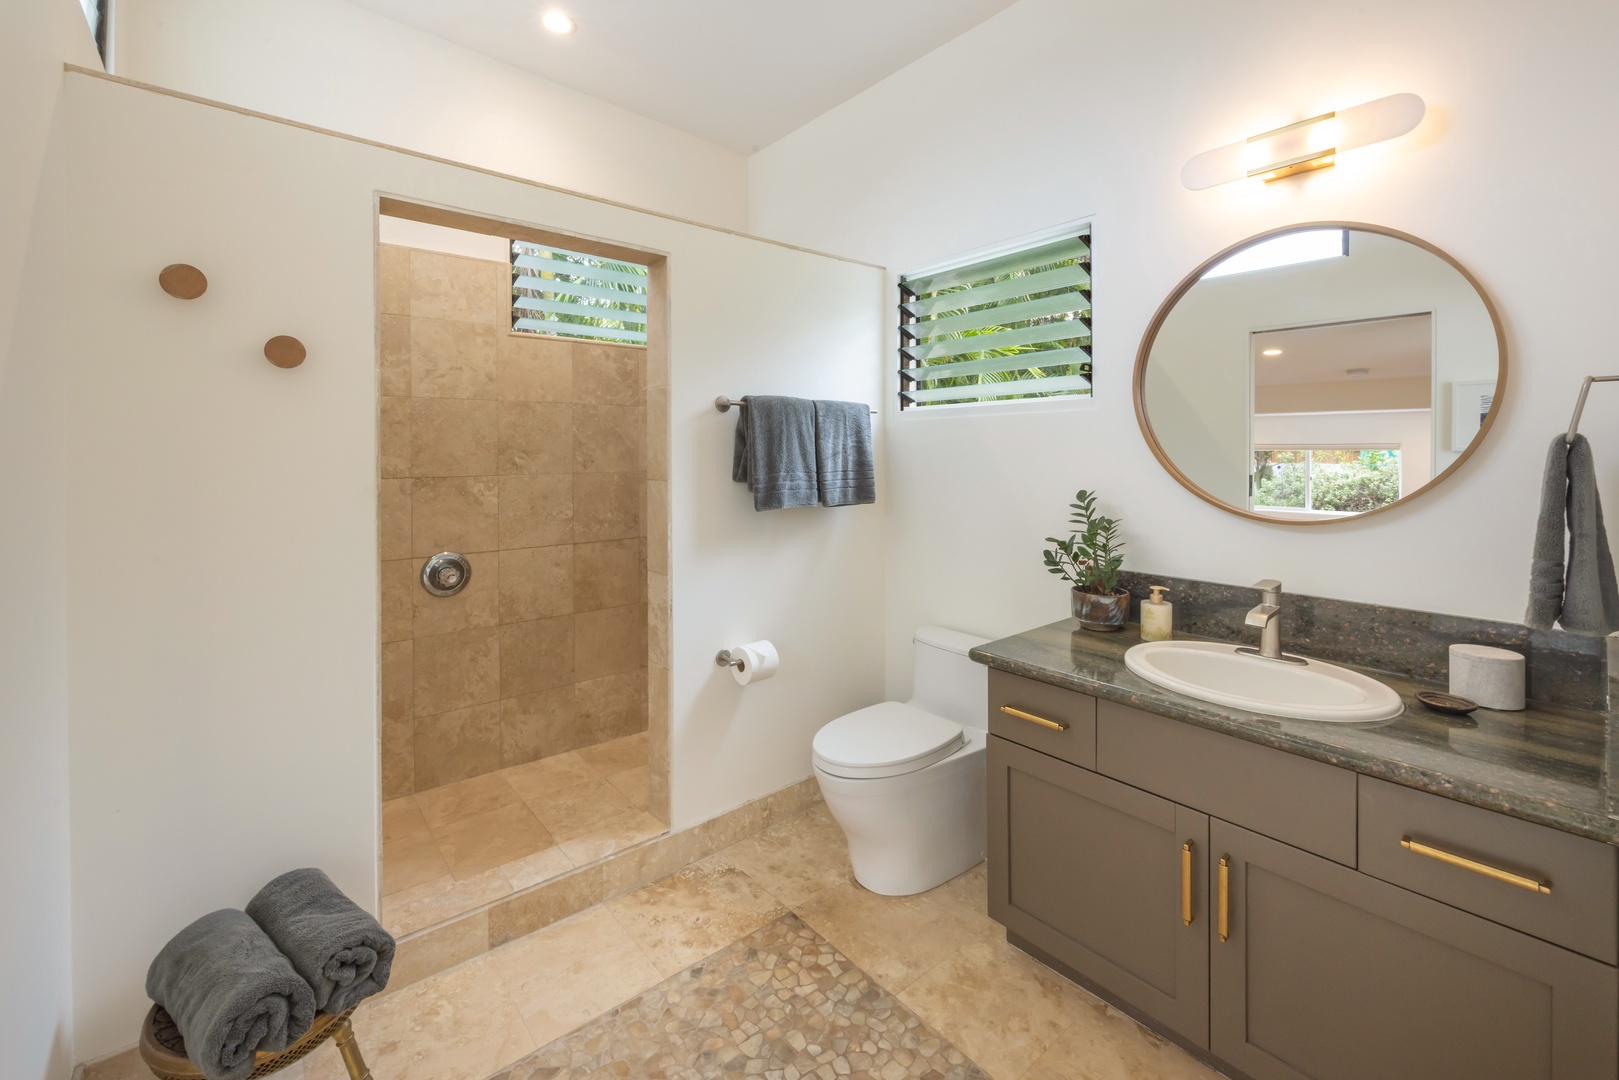 Kailua Vacation Rentals, Lanikai Ola Nani - Bedroom Four Ensuite bath comes with a walk-in shower and ample vanity space